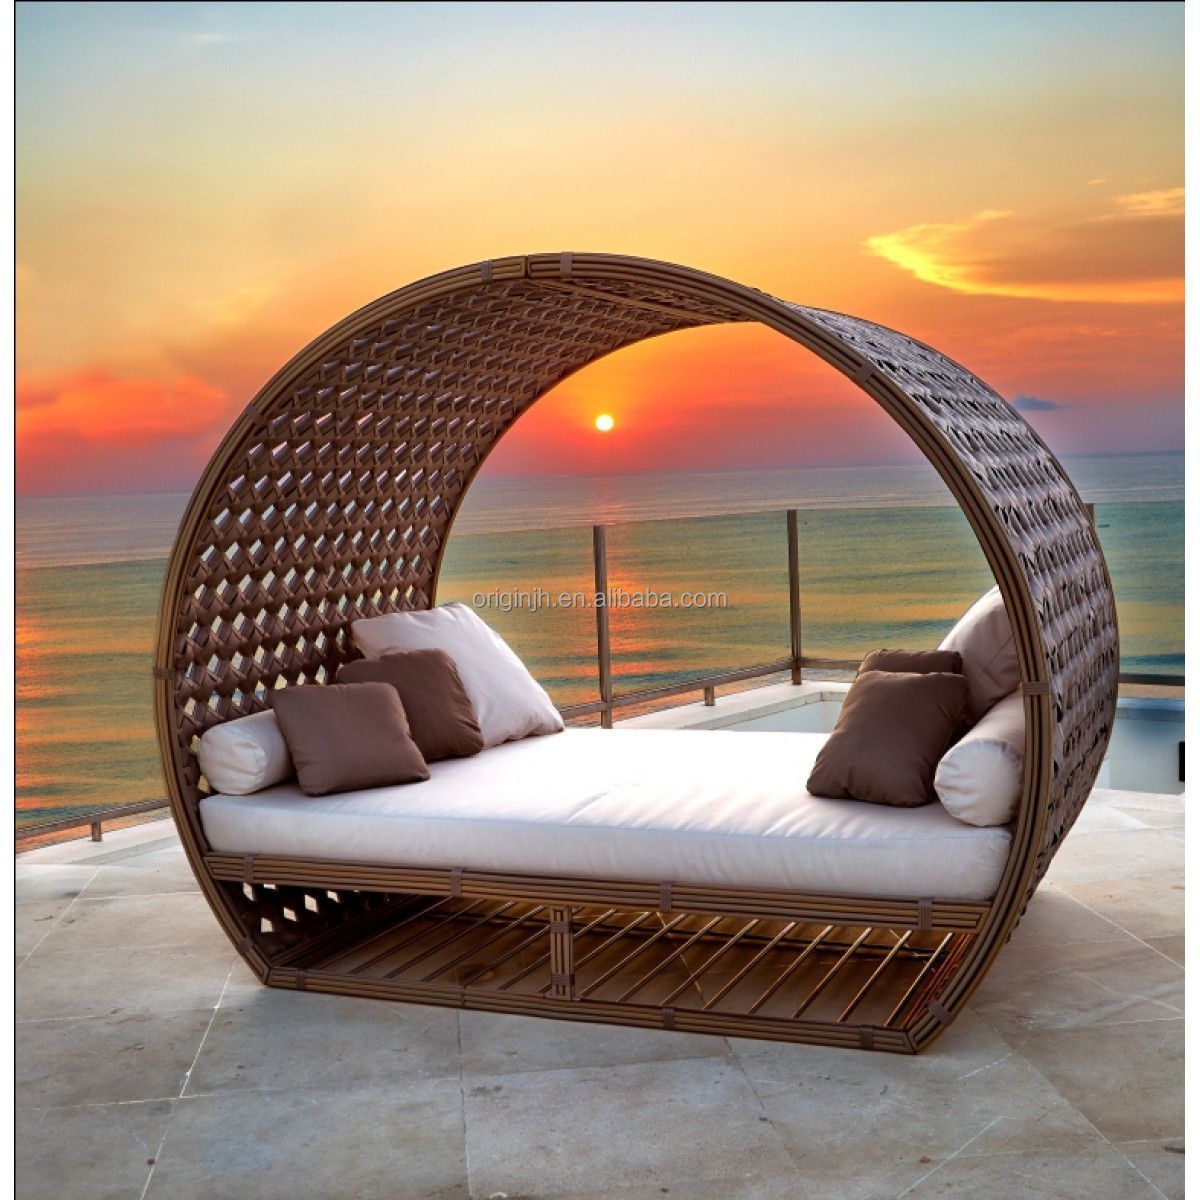 Stylish And Beautiful Outdoor Daybed